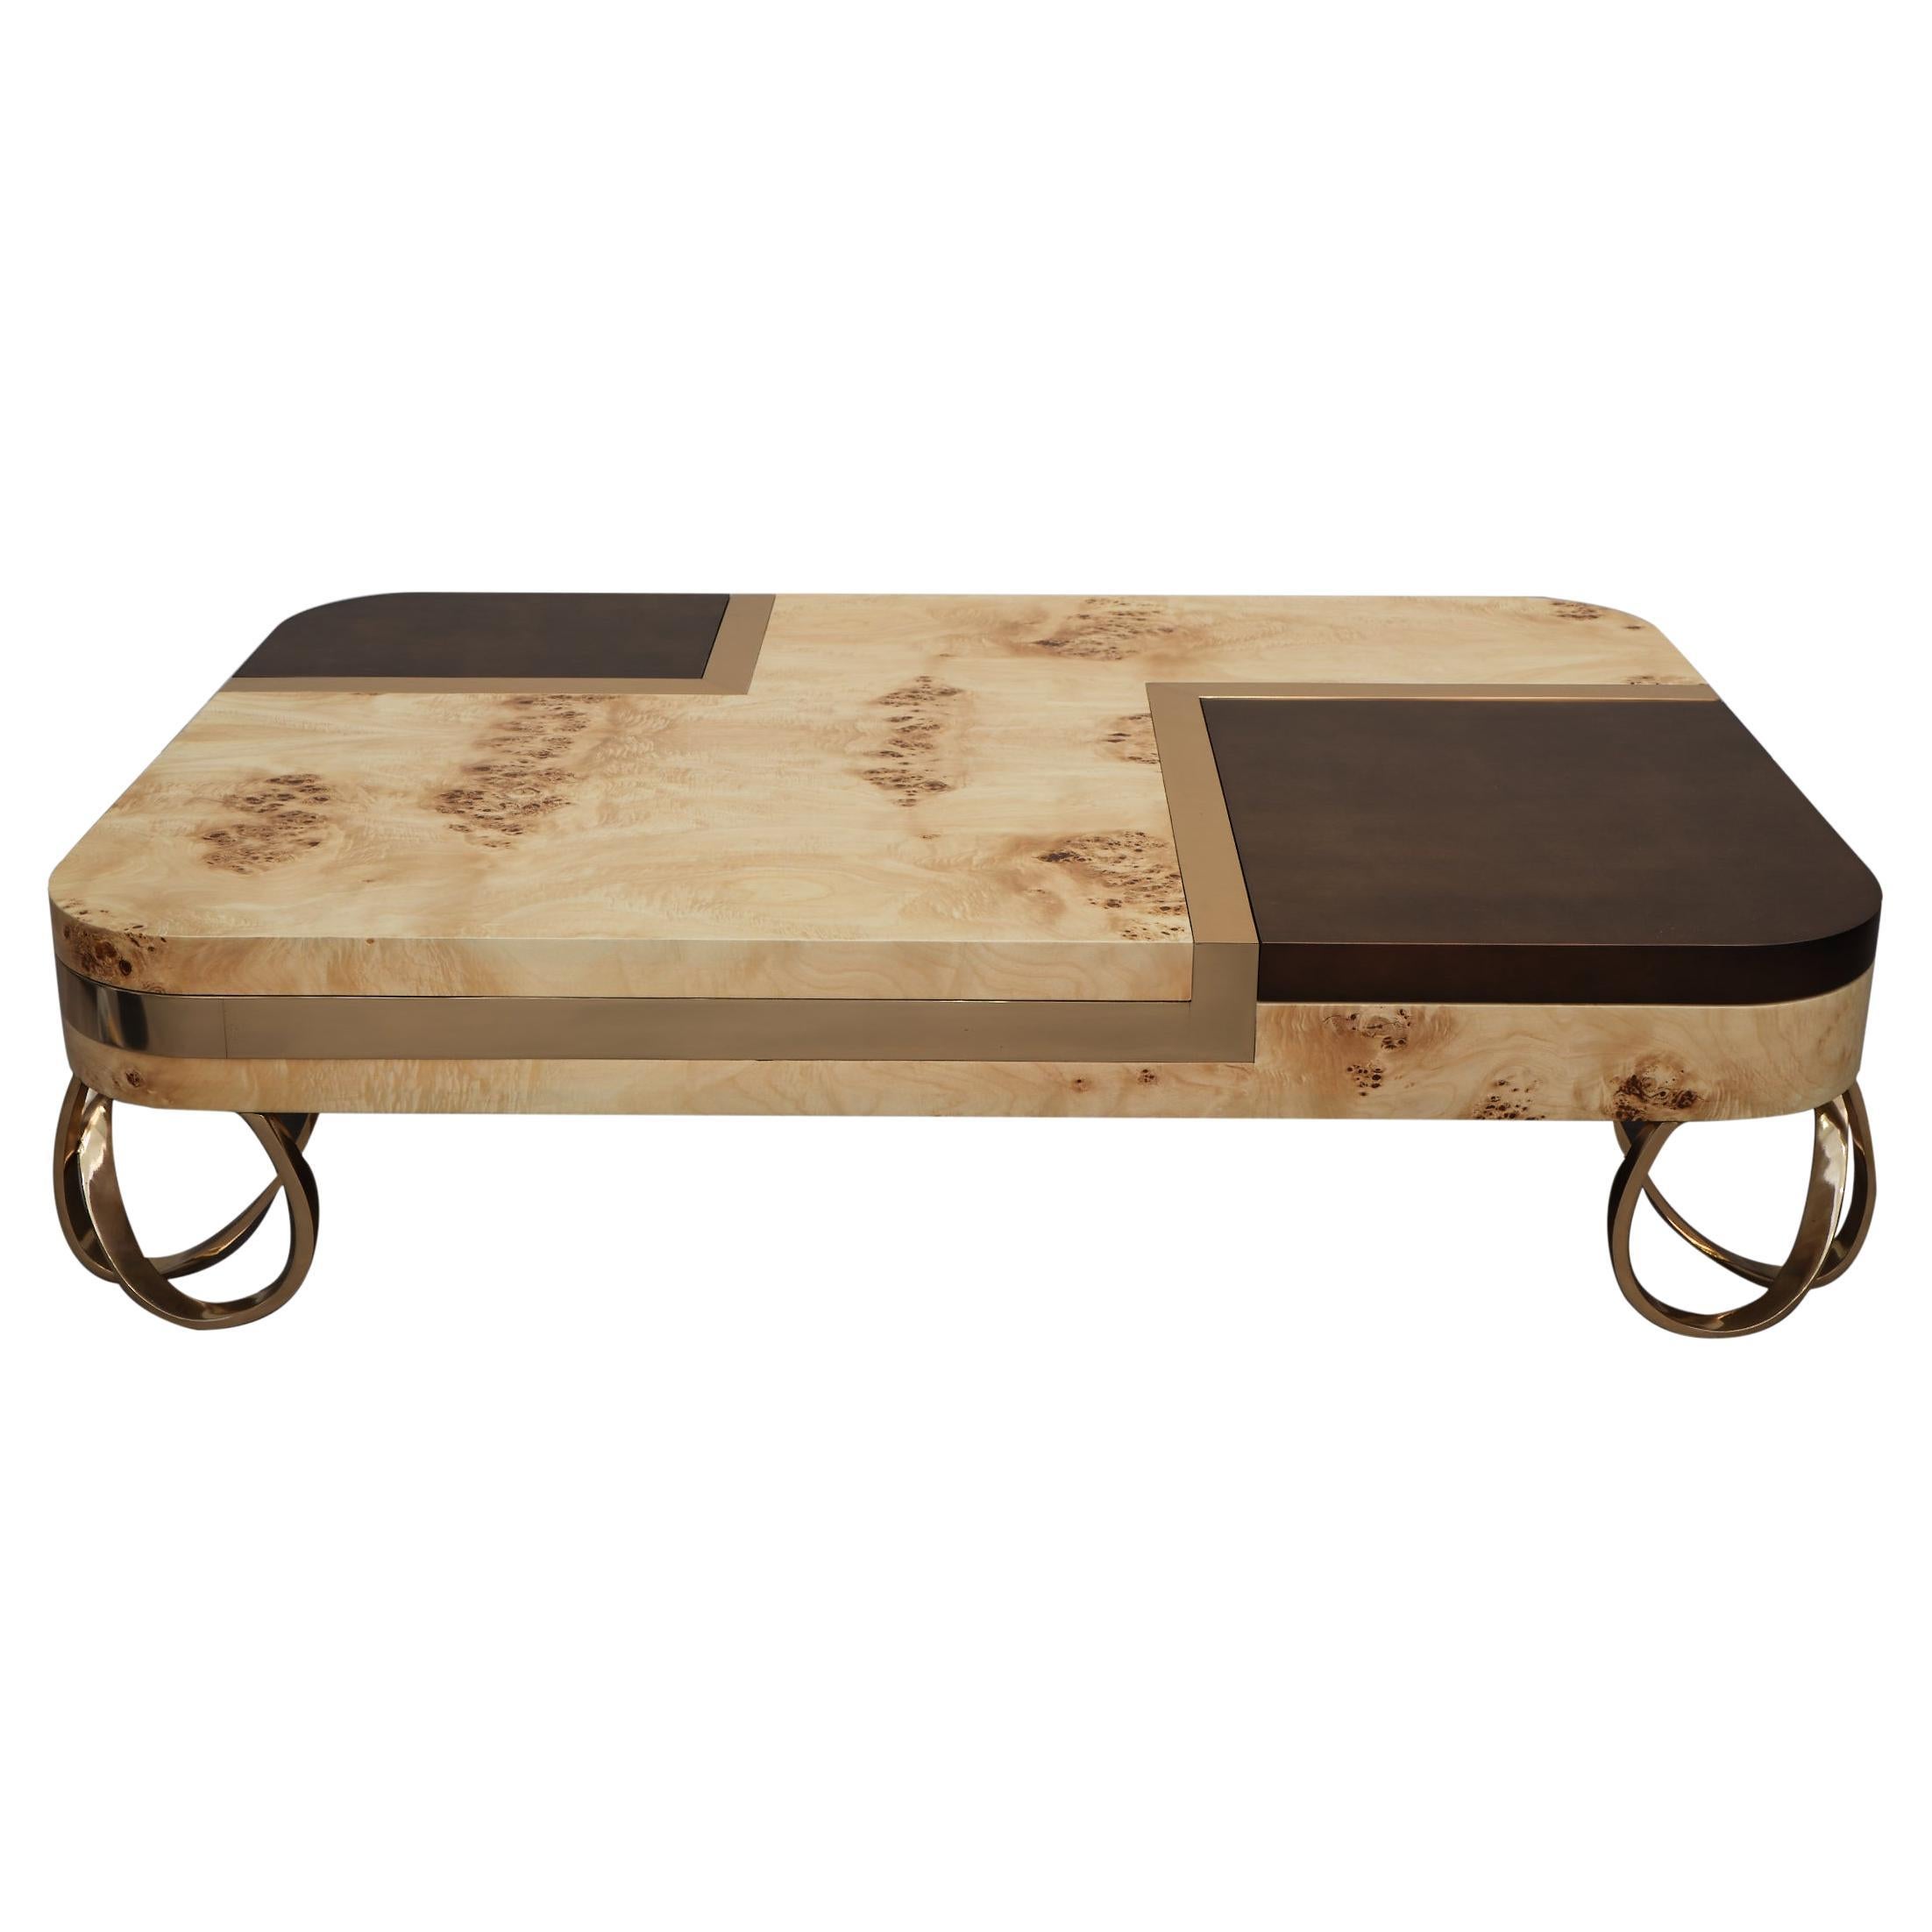 Contemporary Coffee Table, Handcrafted in Bronze and Wood by Belbar Studio For Sale